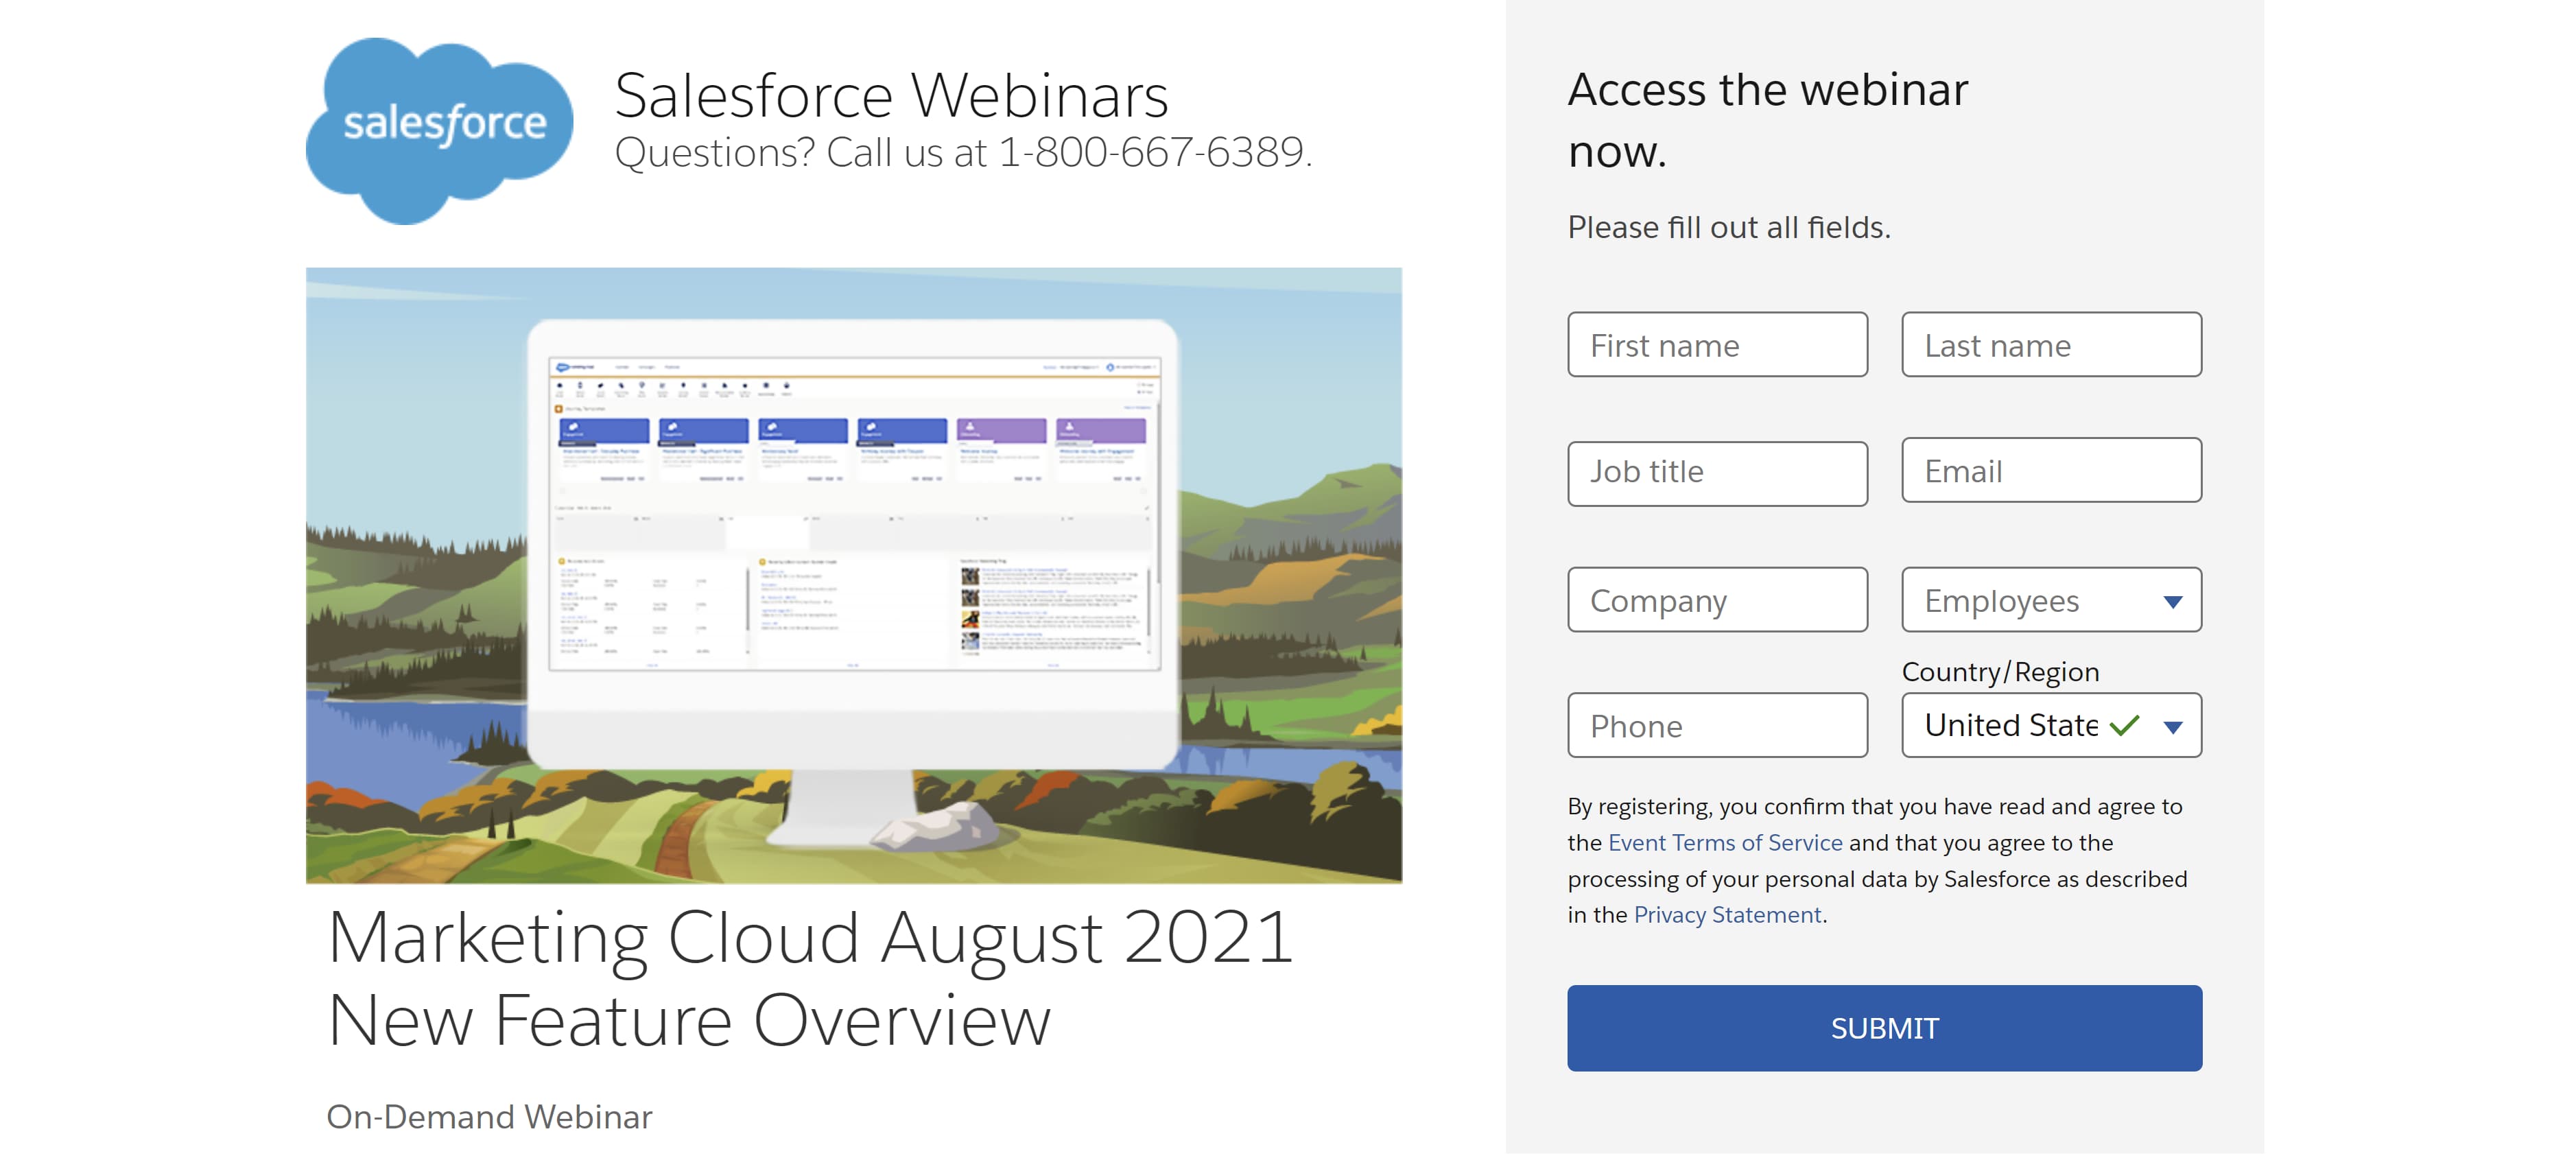 Webinar landing page example from Salesforce